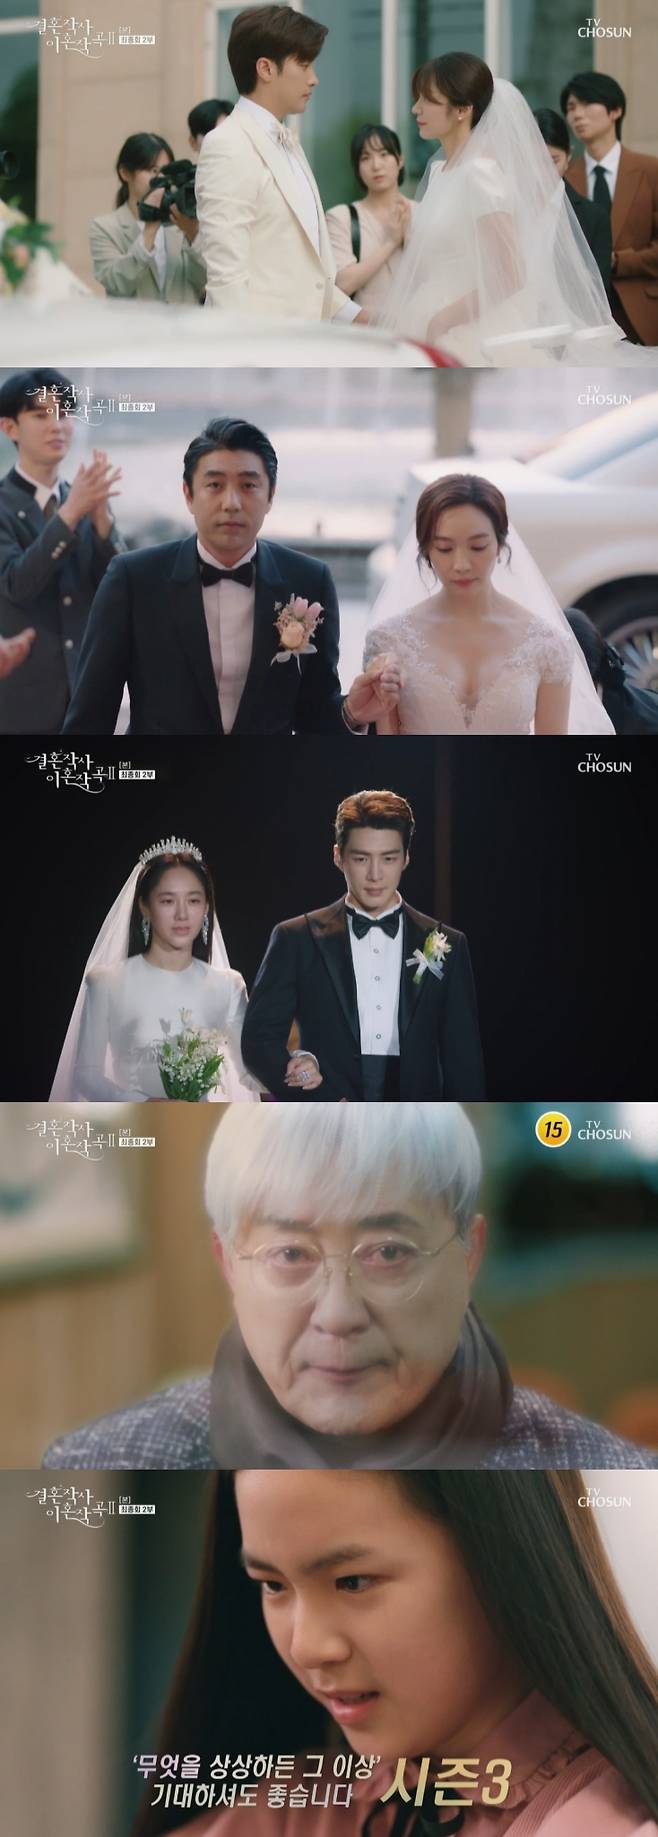 TV Chosun Marriage Writer Divorce Composition 2 broadcast on the 8th showed the final episode and finished the second season.On the same day, various stories were unfolded in the finalization. Seo Dong-ma (Boo Bae) constantly expressed his feelings to Nam Ga-bin (Im Hye-young), and Nam Ga-bin finally said farewell to Park Hae-ryun (Jeon No-min).In addition, Shin Yu-shin (Lee Tae-gon) tried to restore relations with Safi-young (Park Joo-mi), and Ju-hyeon (Sung-hoon) painted a happy future with song won (Lee Min-young).But the appearance of the three couples at the end made them forget all of the previous Remady.Judge Hyun, who promised to simply marry a baby if she has a baby, suddenly climbed into the limo with Amy (Song Ji-in) as the screen switched.Judge started as a Wedding chapel, holding hands affectionately with Amy.On the other hand, song won, who was about to give birth, headed to Wedding chapel with another man; the main character was the western half (Moon Seong-ho).The western half, which had been receiving attention from Safi Young and Bu Hye-ryong (Lee Ga-young), headed to the Wedding chapel by escorting song won, which had no major contact.The last couple to appear was also shocking: I will enter the bride and groom at the same time was Seo Dong-ma and Safi-young who walked Virgin Road together with the host.They walked with their arms crossed affectionately.Many viewers were shocked by the birth of three shocking couples, including Judge Hyun and Amy, Seoban and song won, Seo Dong-ma and Safi Young.It wasnt over here. Another extraordinary ending was waiting.Cinzia Monreale (Park Seo-kyung), who went alone in the elevator, looked at Shin Yusin and said, Lets go golf.Kim dong-mi (Kim Bo-yeon) came out and Cinzia Monreale stared at Kim dong-mi with his grandfather Shin Ki-rim (Roh Joo-hyun) in a state of beckoning.Kim dong-mi sat down in fear and Cinzia Monreale ran into Kim dong-mi and soon began choking.The marriage song Divorce Composition 2, which showed shocking development every time, tied the second season with the wedding scene of three unimaginable couples and the figure of Cinzia Monreale in his grandfather.There is interest in how the development of the unconventional development will be solved in Season 3, as the production teams announcement that Whatever you imagine, you can expect more.